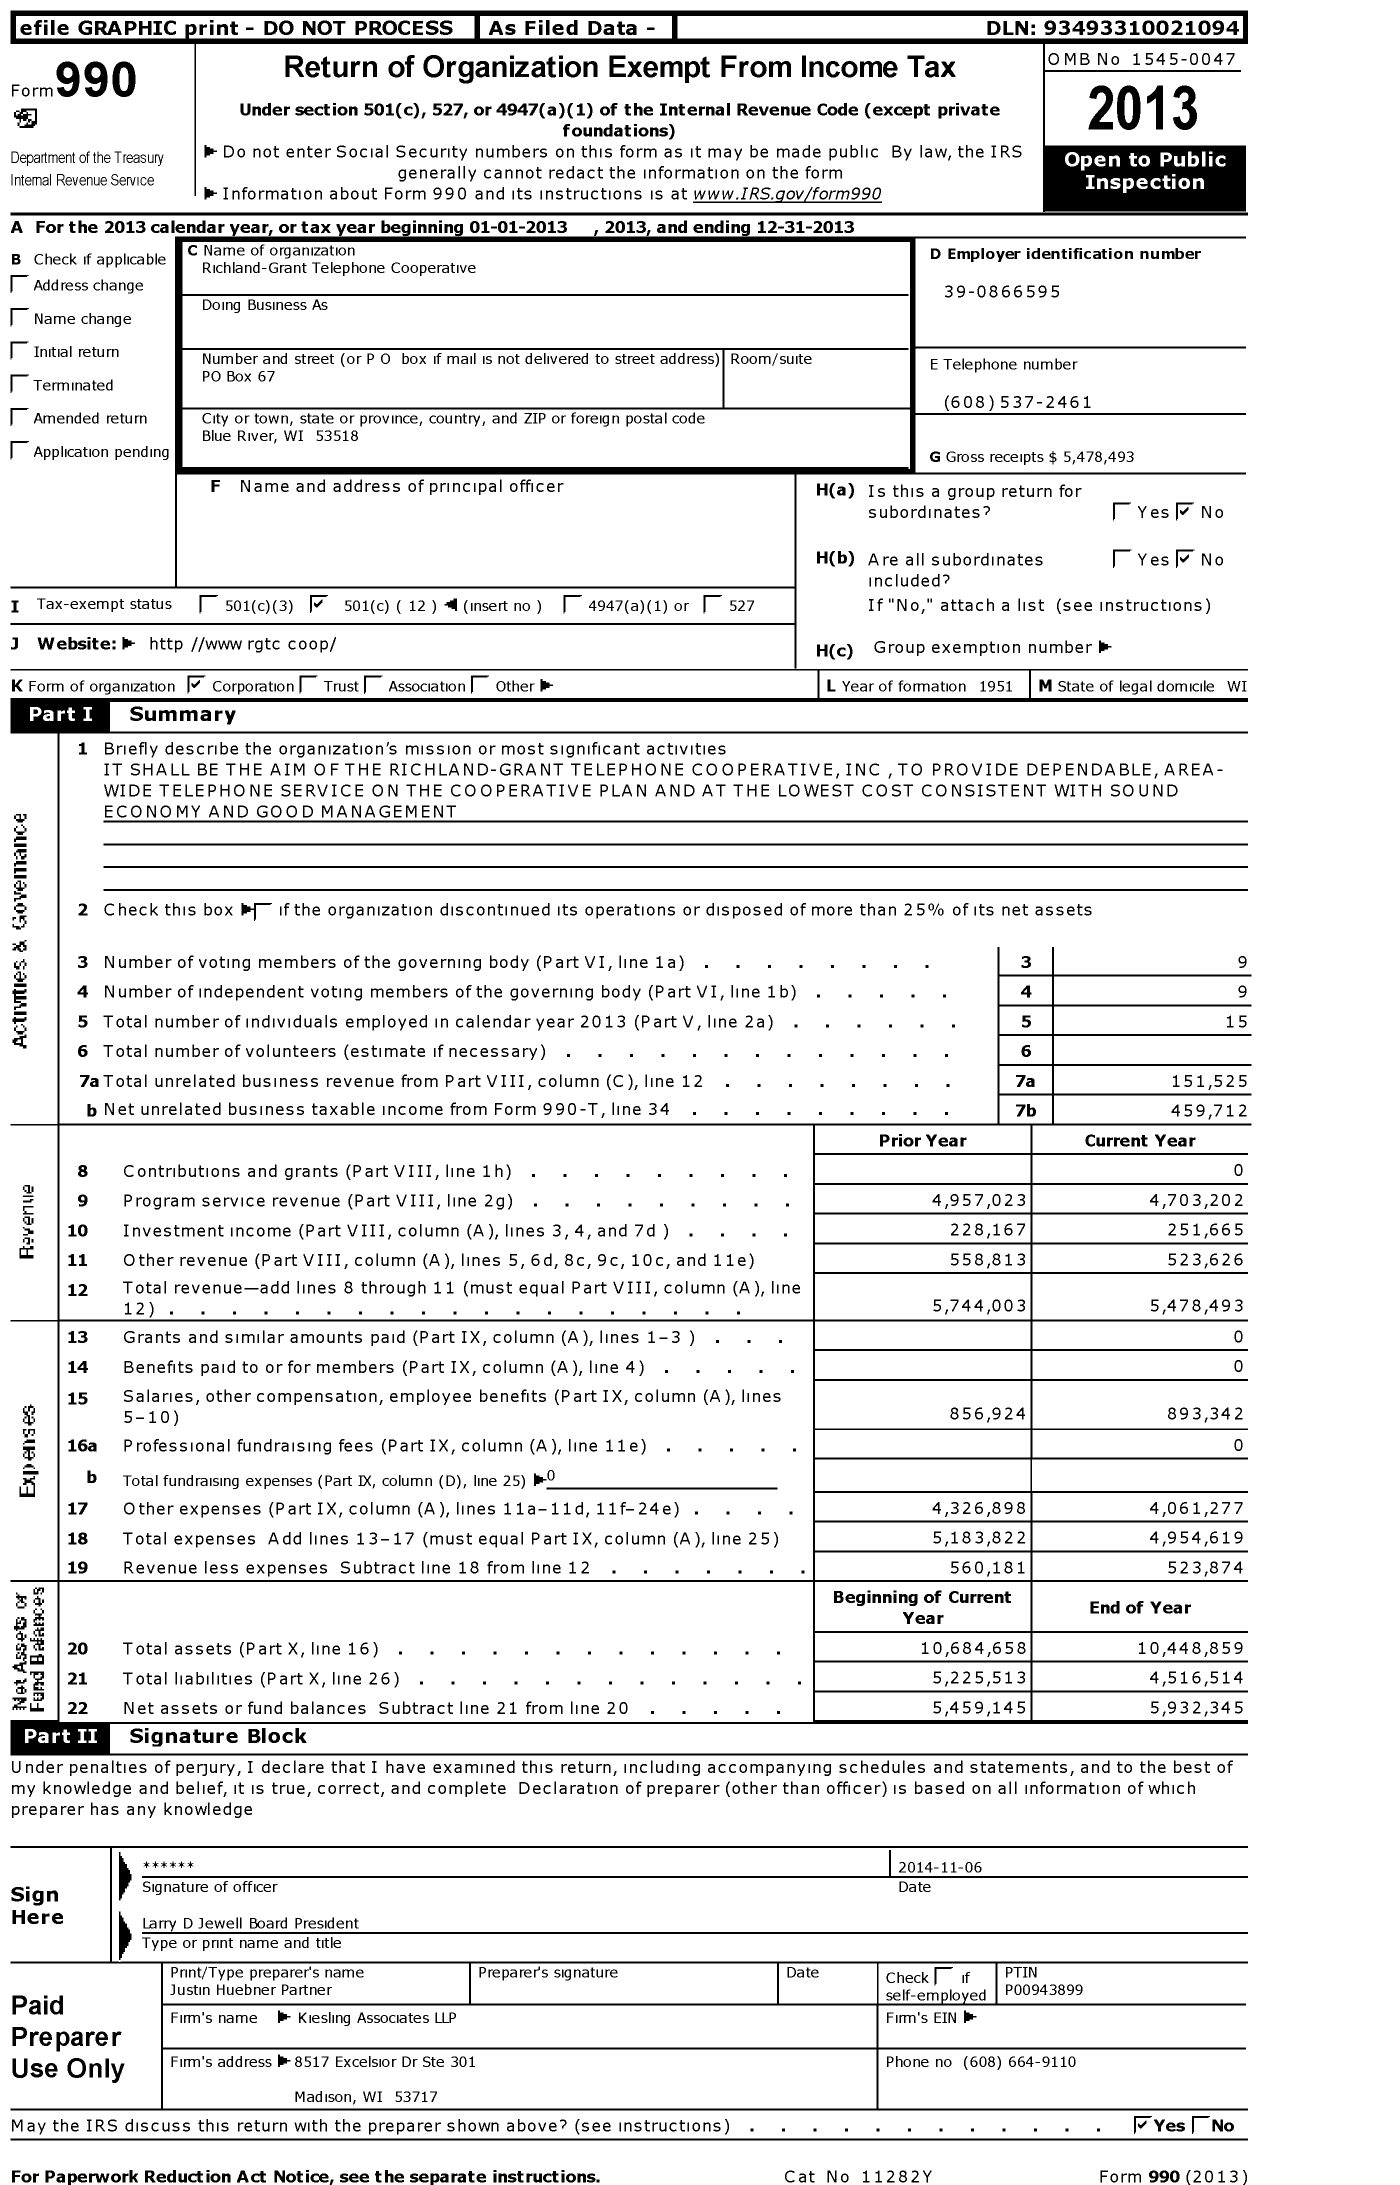 Image of first page of 2013 Form 990O for Richland-Grant Telephone Cooperative